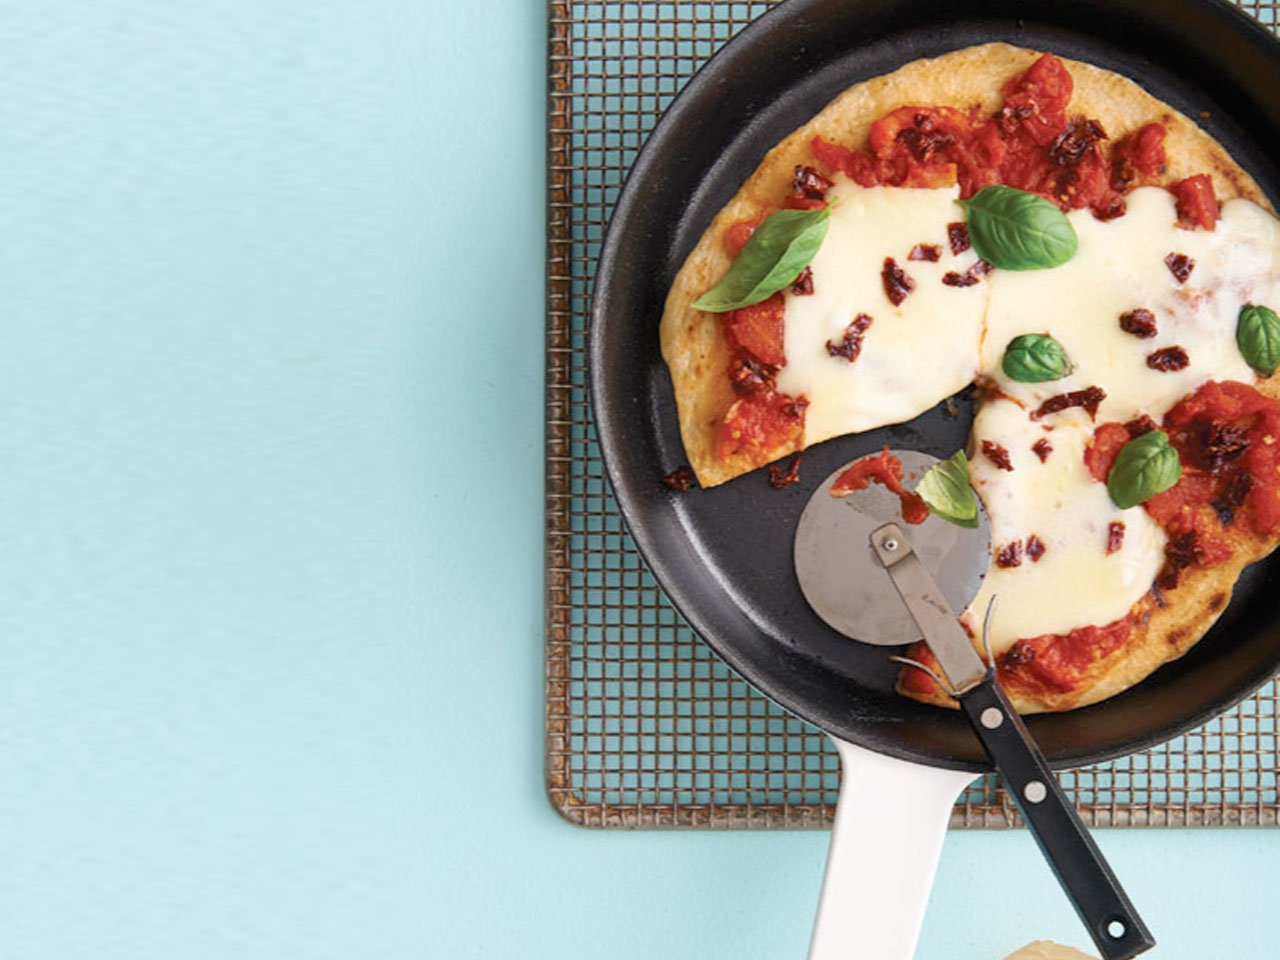 Skillet one-pan pizza recipe